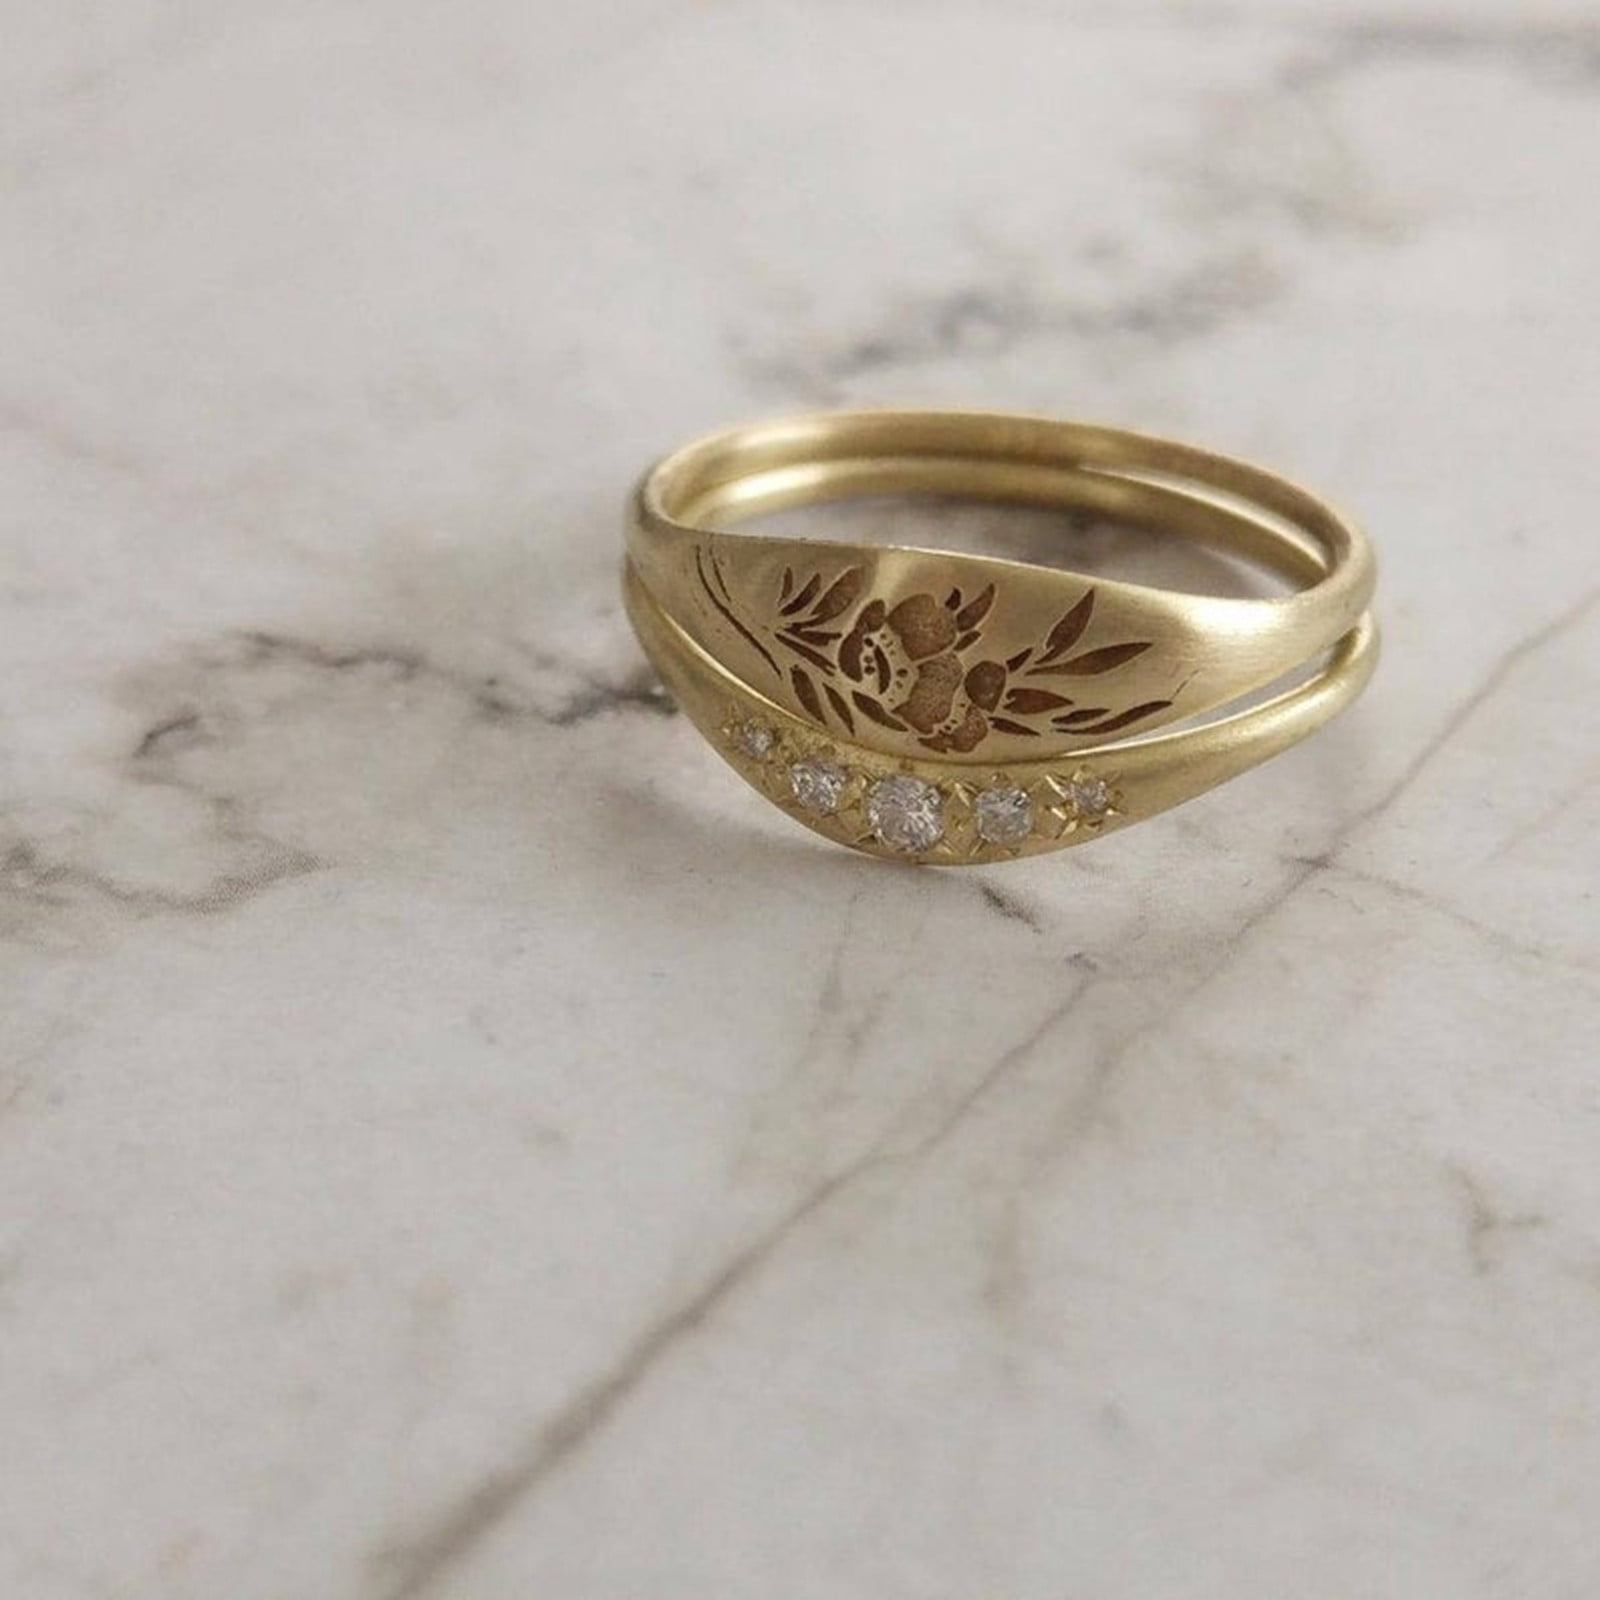 Pure Gold Ring Mens | AU999 Ring For Him | 24k Solid Gold Ring | Hammered  Ring Men | Gold Inlaid Ring | Rustic Rings For Men | Band Ring Men